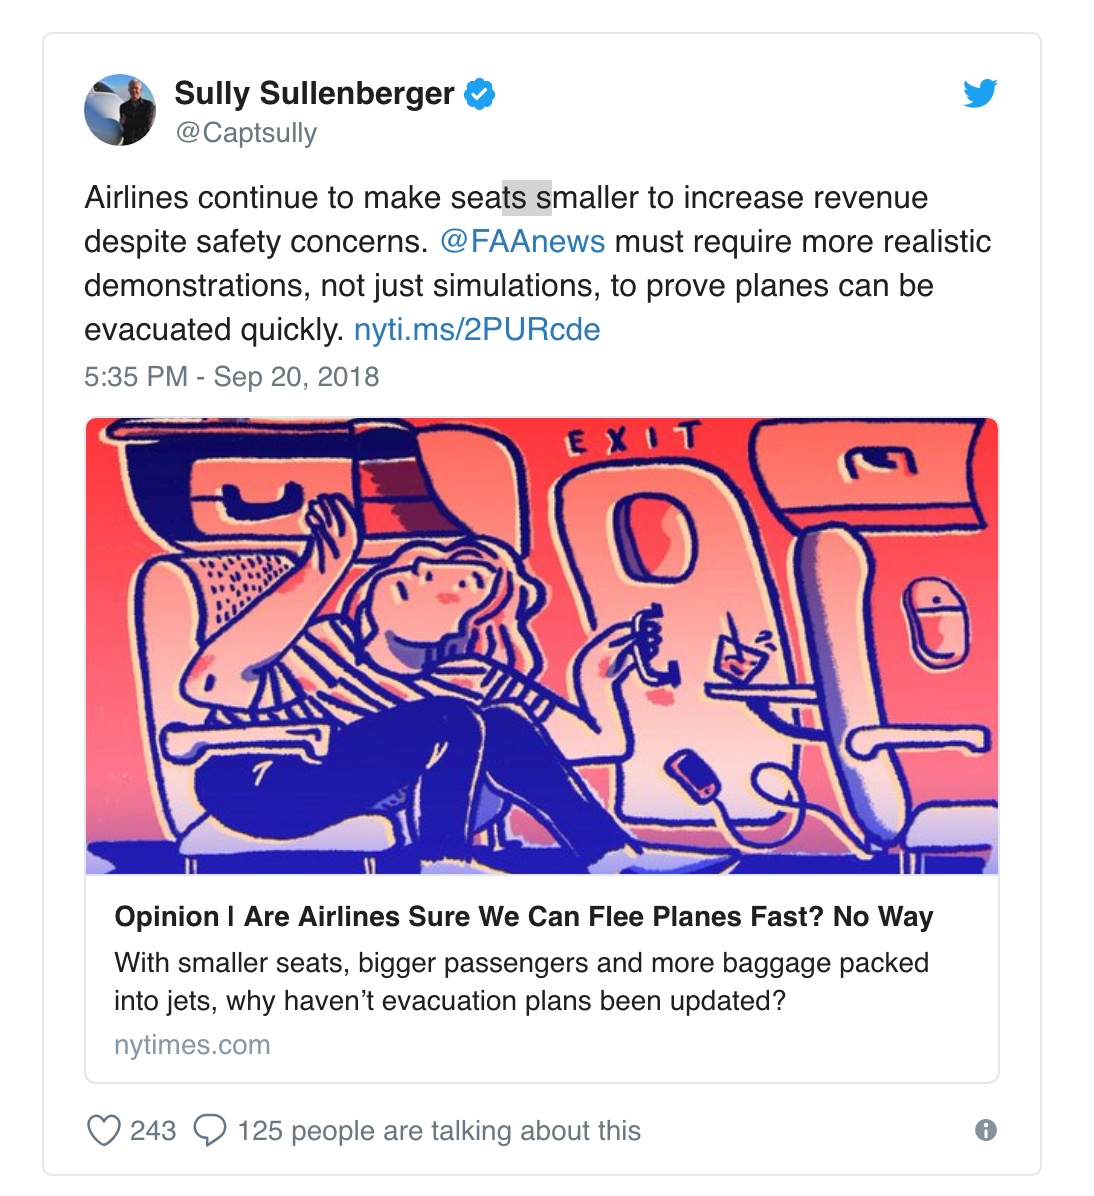 Tweet by Sully Sullenberger